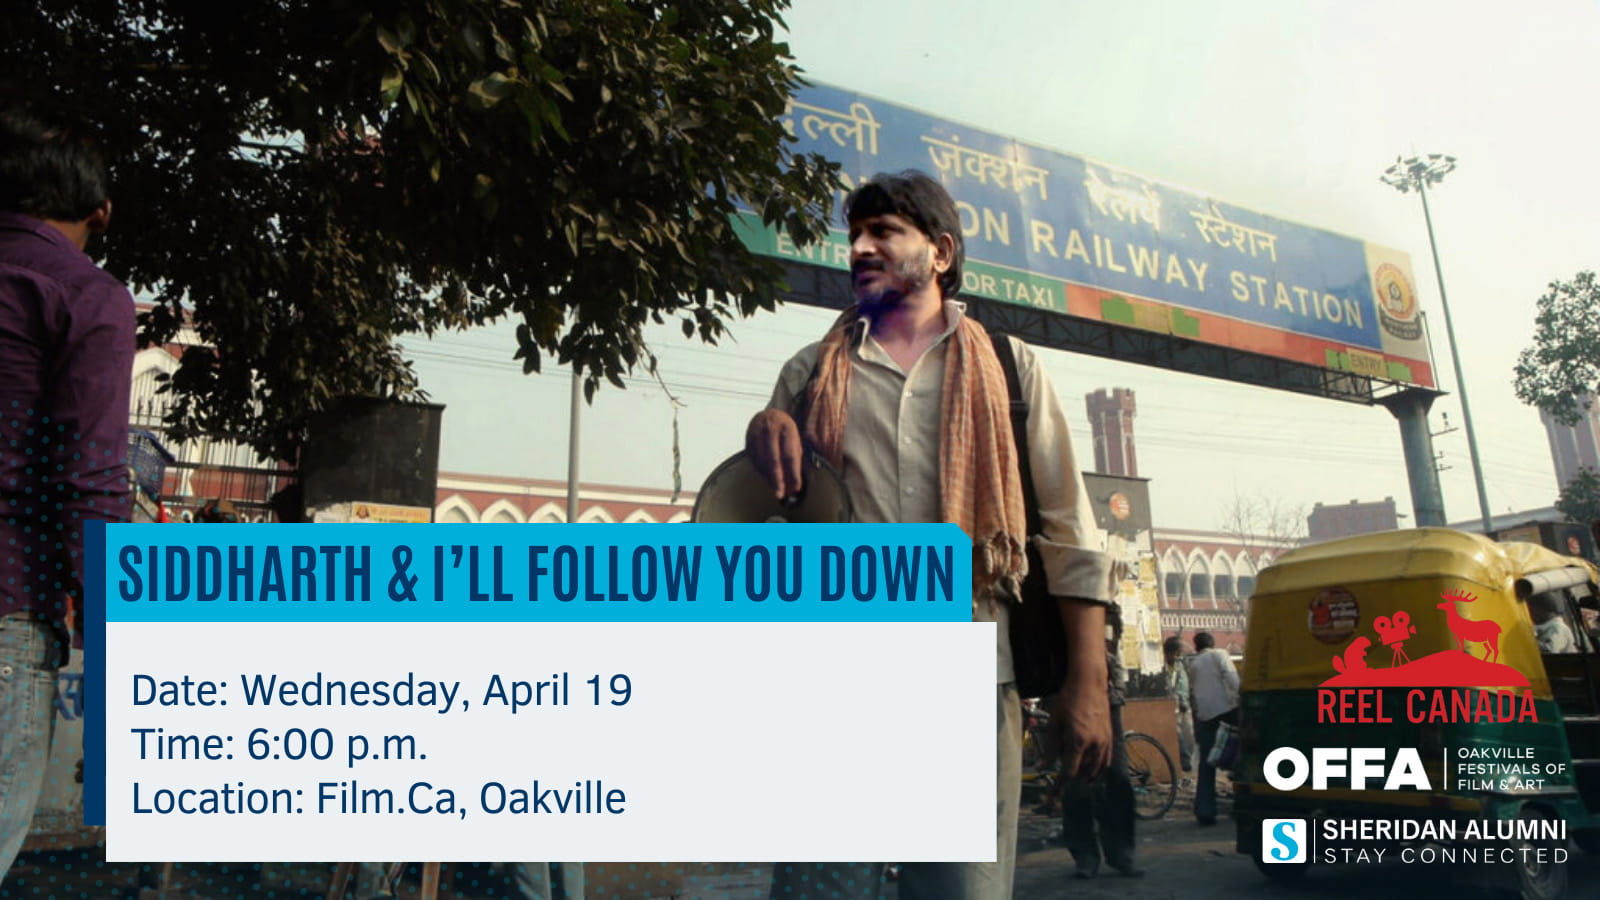 Siddarth & I'll Follow You Down | Date: Wednesday, April 19 | Time: 6:00 p.m. | Location: Film.Ca, Oakville | Reel Canada | OFFA | Oakville Festivals of Film & Art | Sheridan Alumni | Stay Connected